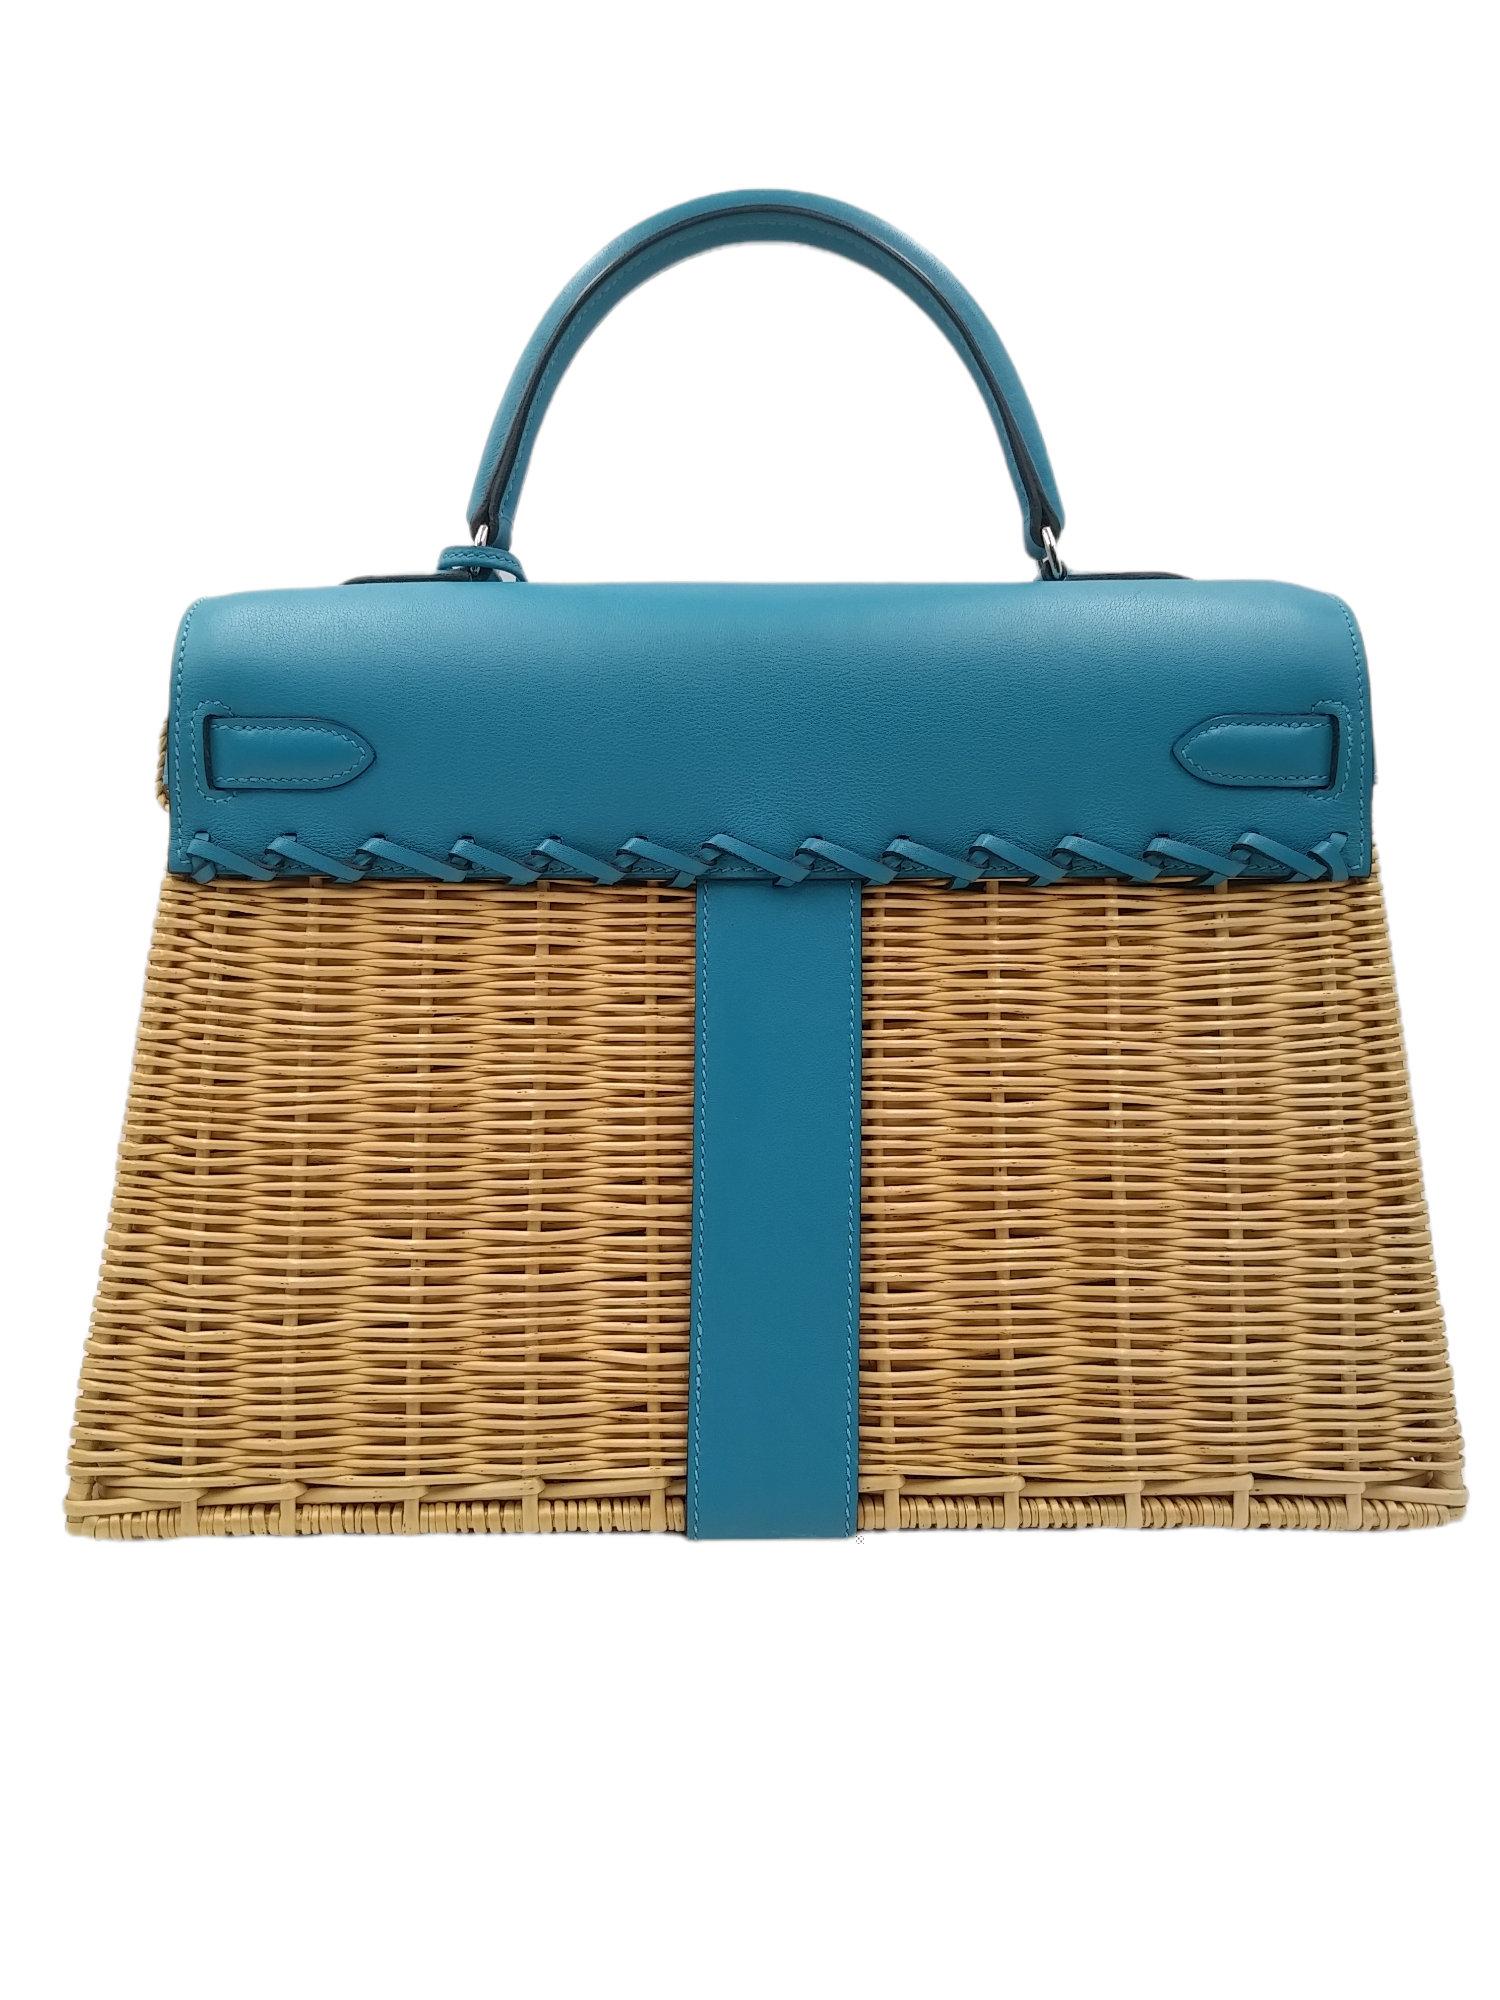 Hermès Wicker and Turquoise Barenia Leather Picnic Bag Kelly 35cm Palladium Hardware, 2013
- 100% authentic Hermès
- Osier wicker with a front flap of barenia leather
- two straps with front toggle closure,clochette with lock and two keys
- single